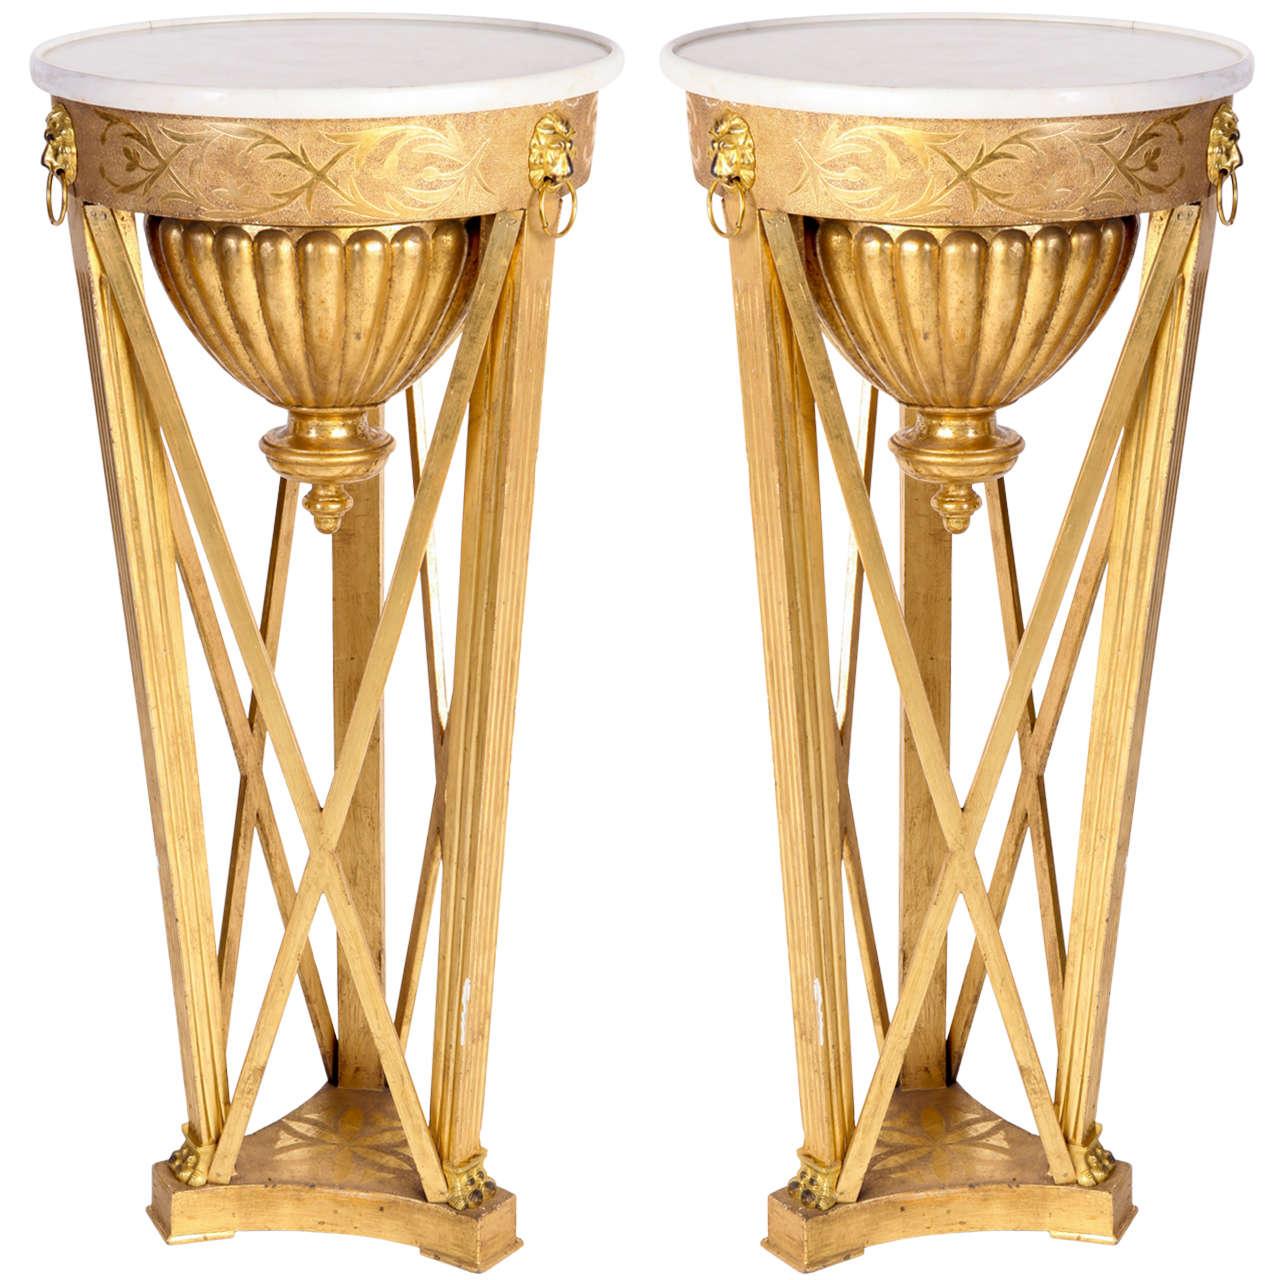 Very Fine Pair of Italian Neoclassical Guéridons or Side Tables Tuscany, 1830 For Sale 3